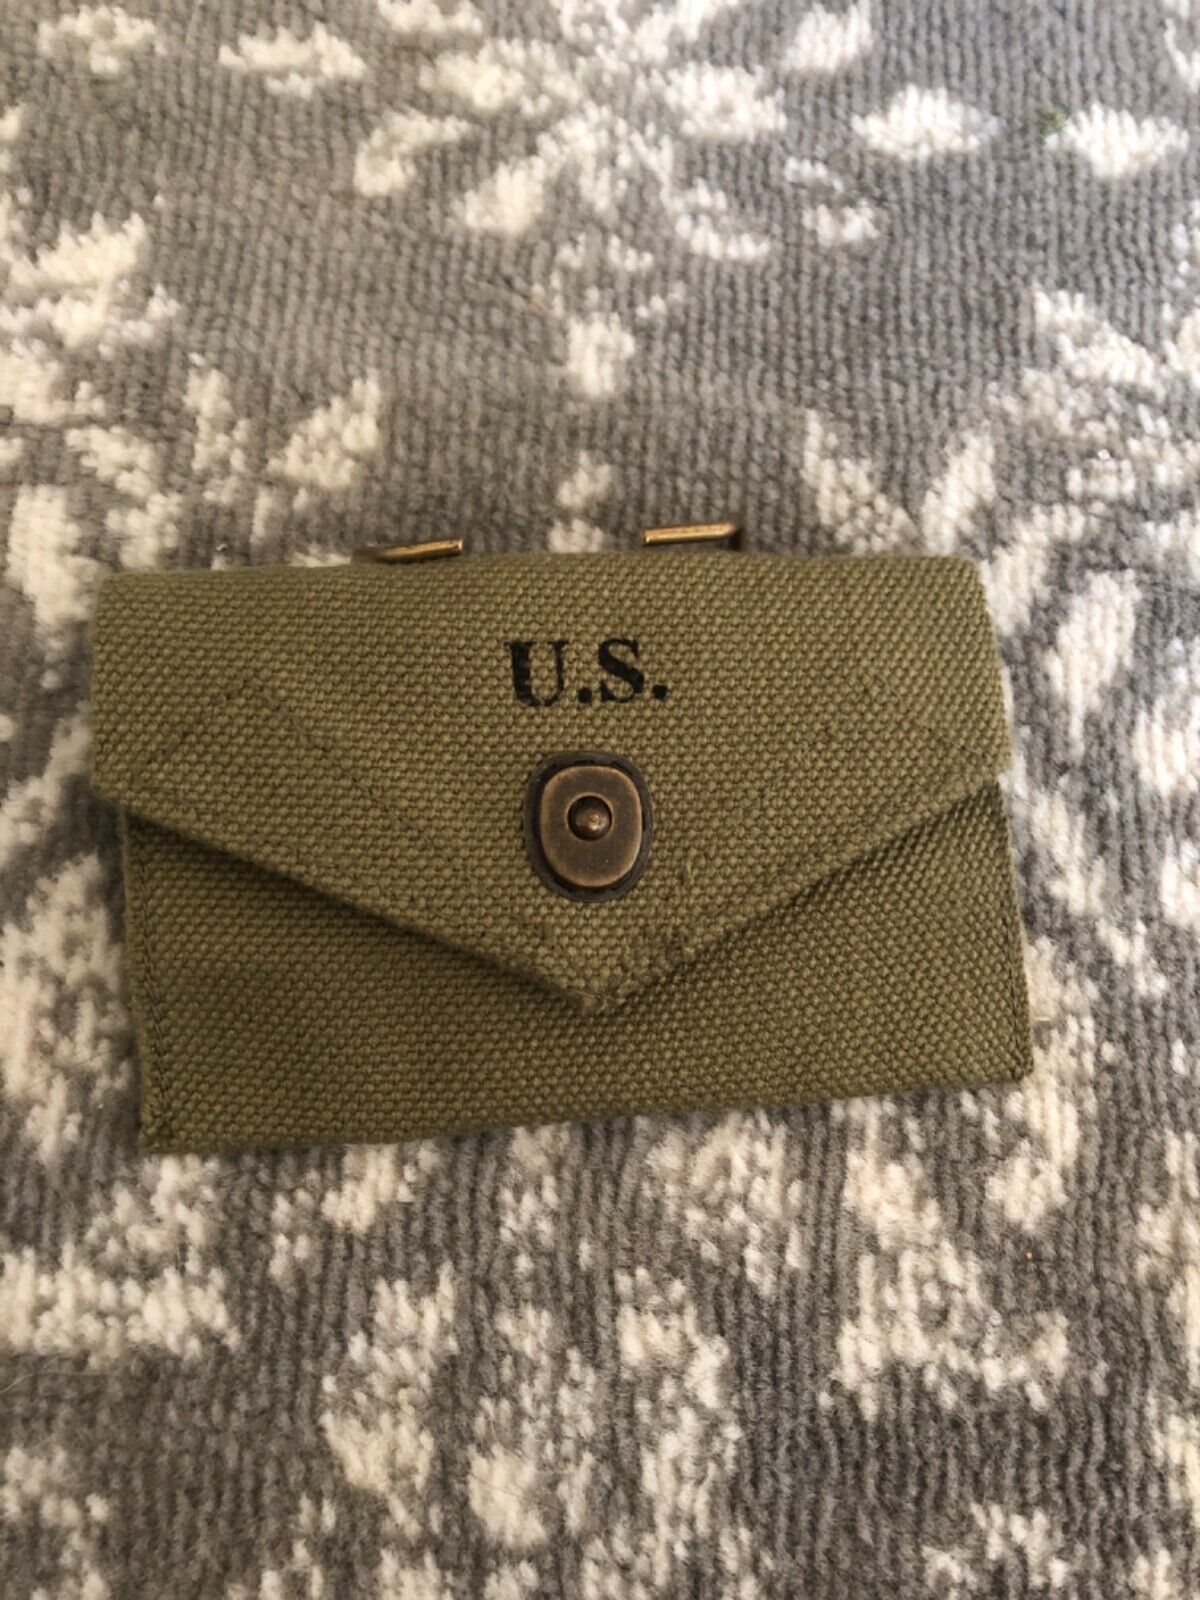 WWII US first aid pouch